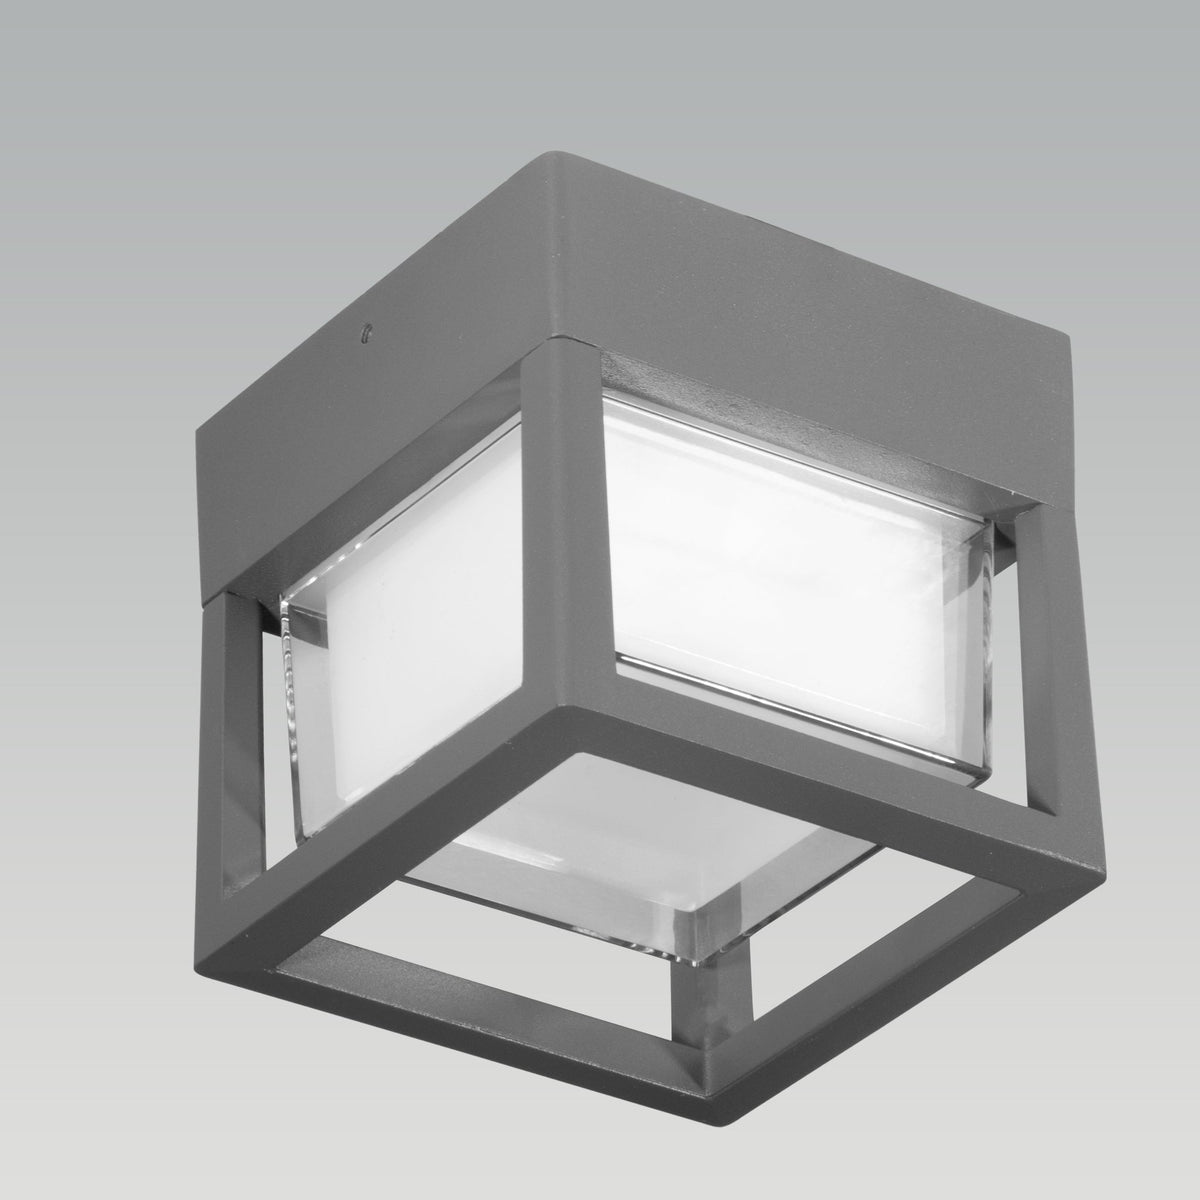 Buy United Square Outdoor LED Ceiling Light waterproof